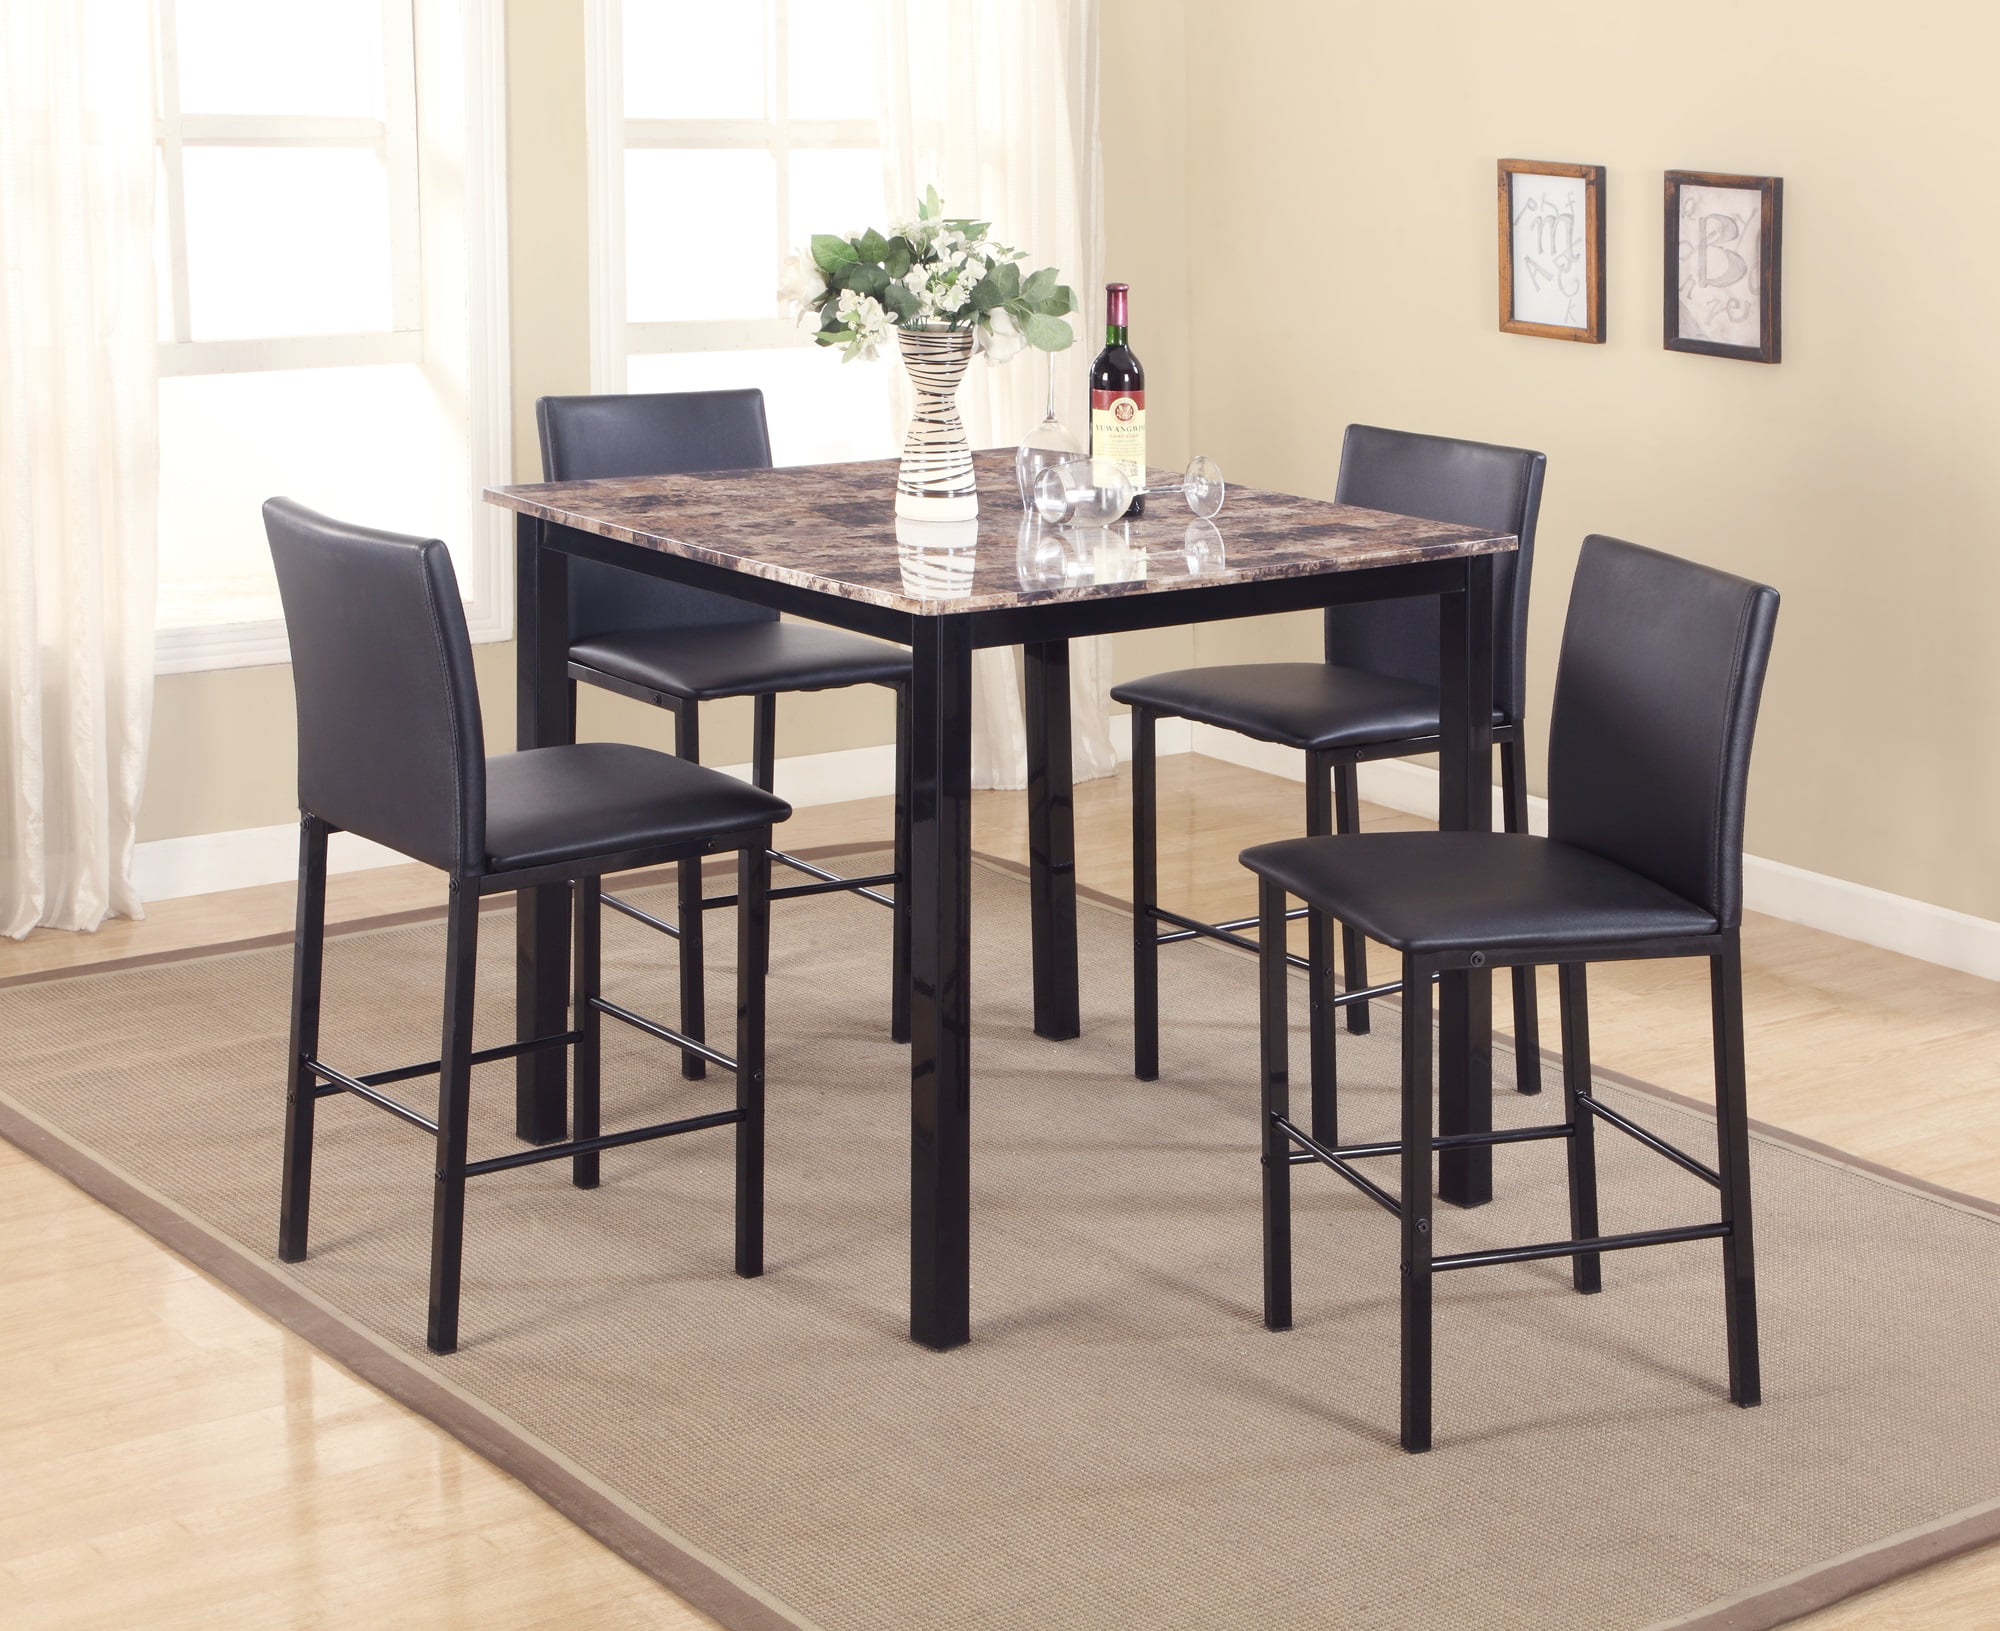 Mainstay 5-Piece Counter Height Dining Set Warm in Black 2 Pack